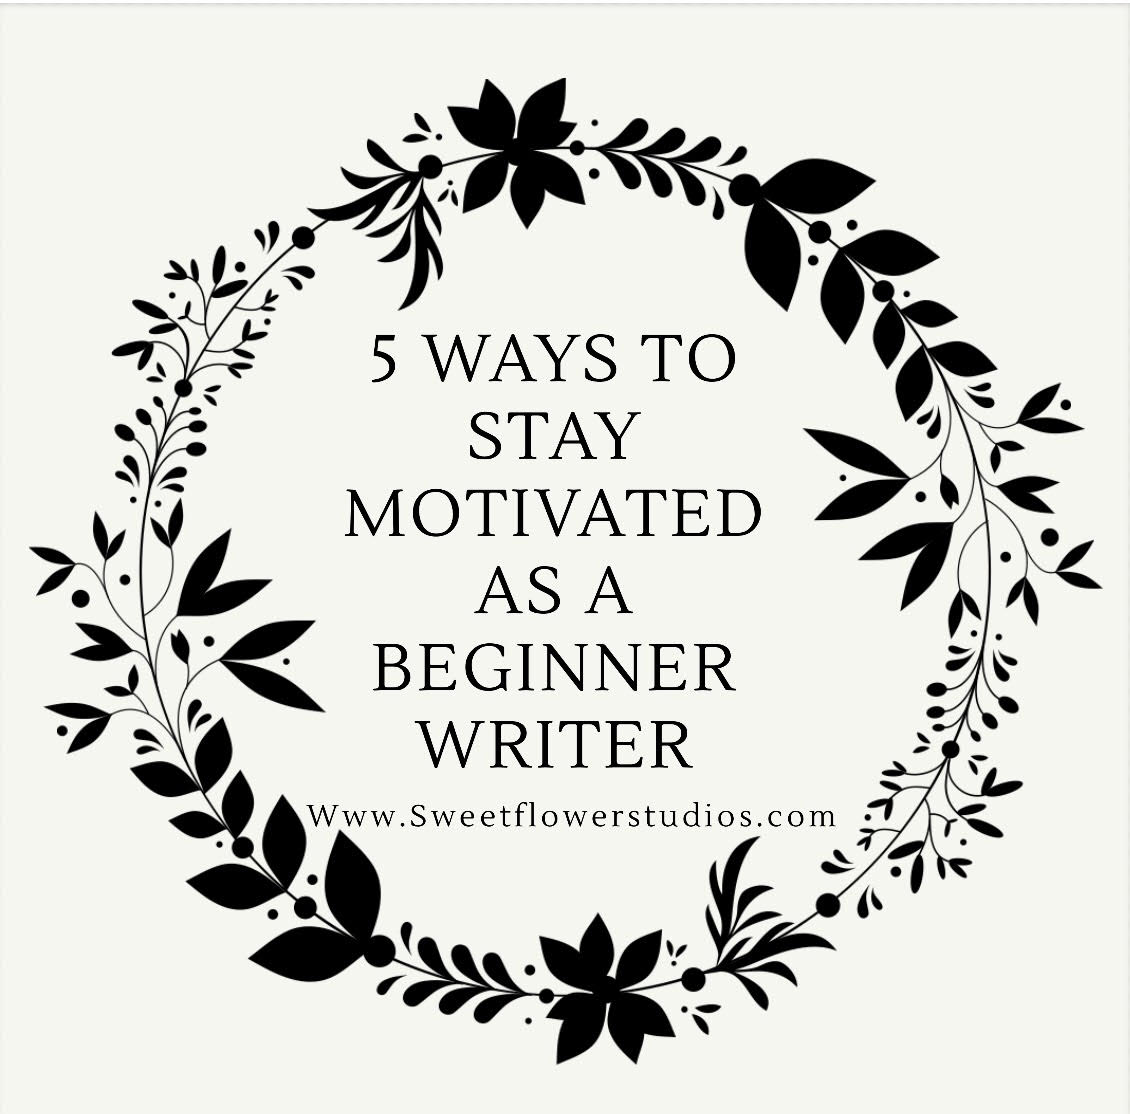 5 Way To Stay Motivated As A Beginner Writer